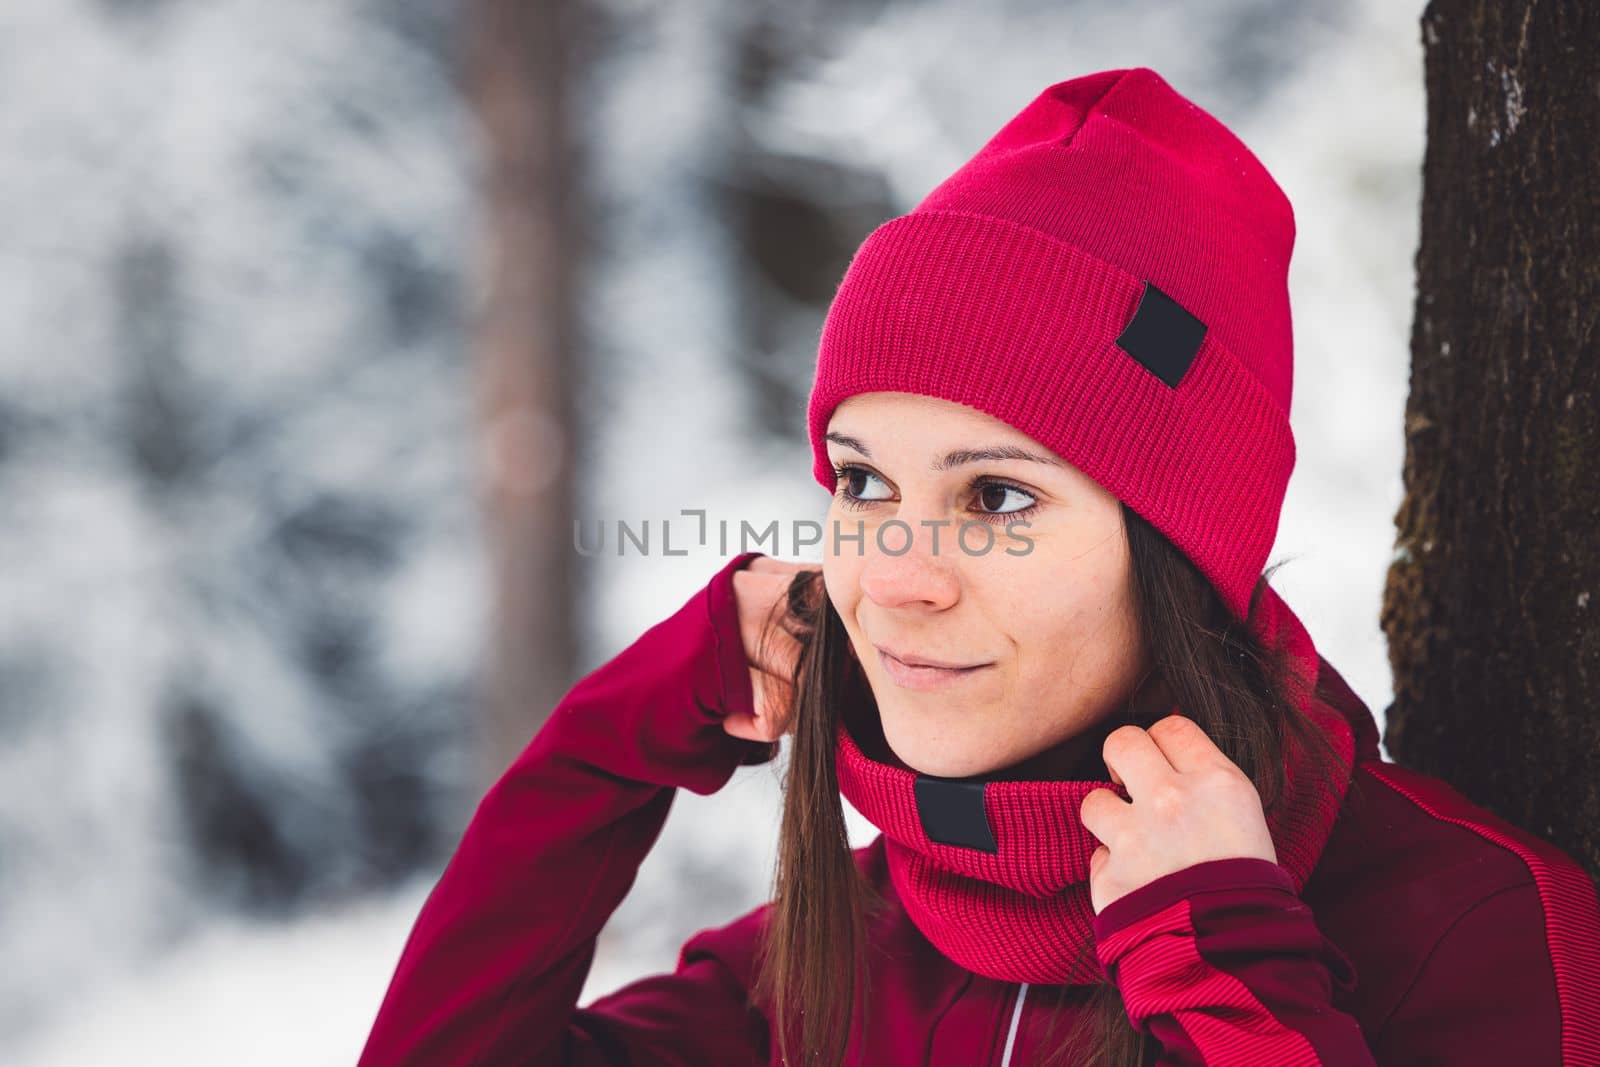 Beautiful young caucasian woman with brown hair, wearing a red jacket and a hat outside in the forest when it's snowing. Woman walking around a snowy forest. Woman holding a to go cup with tea. 